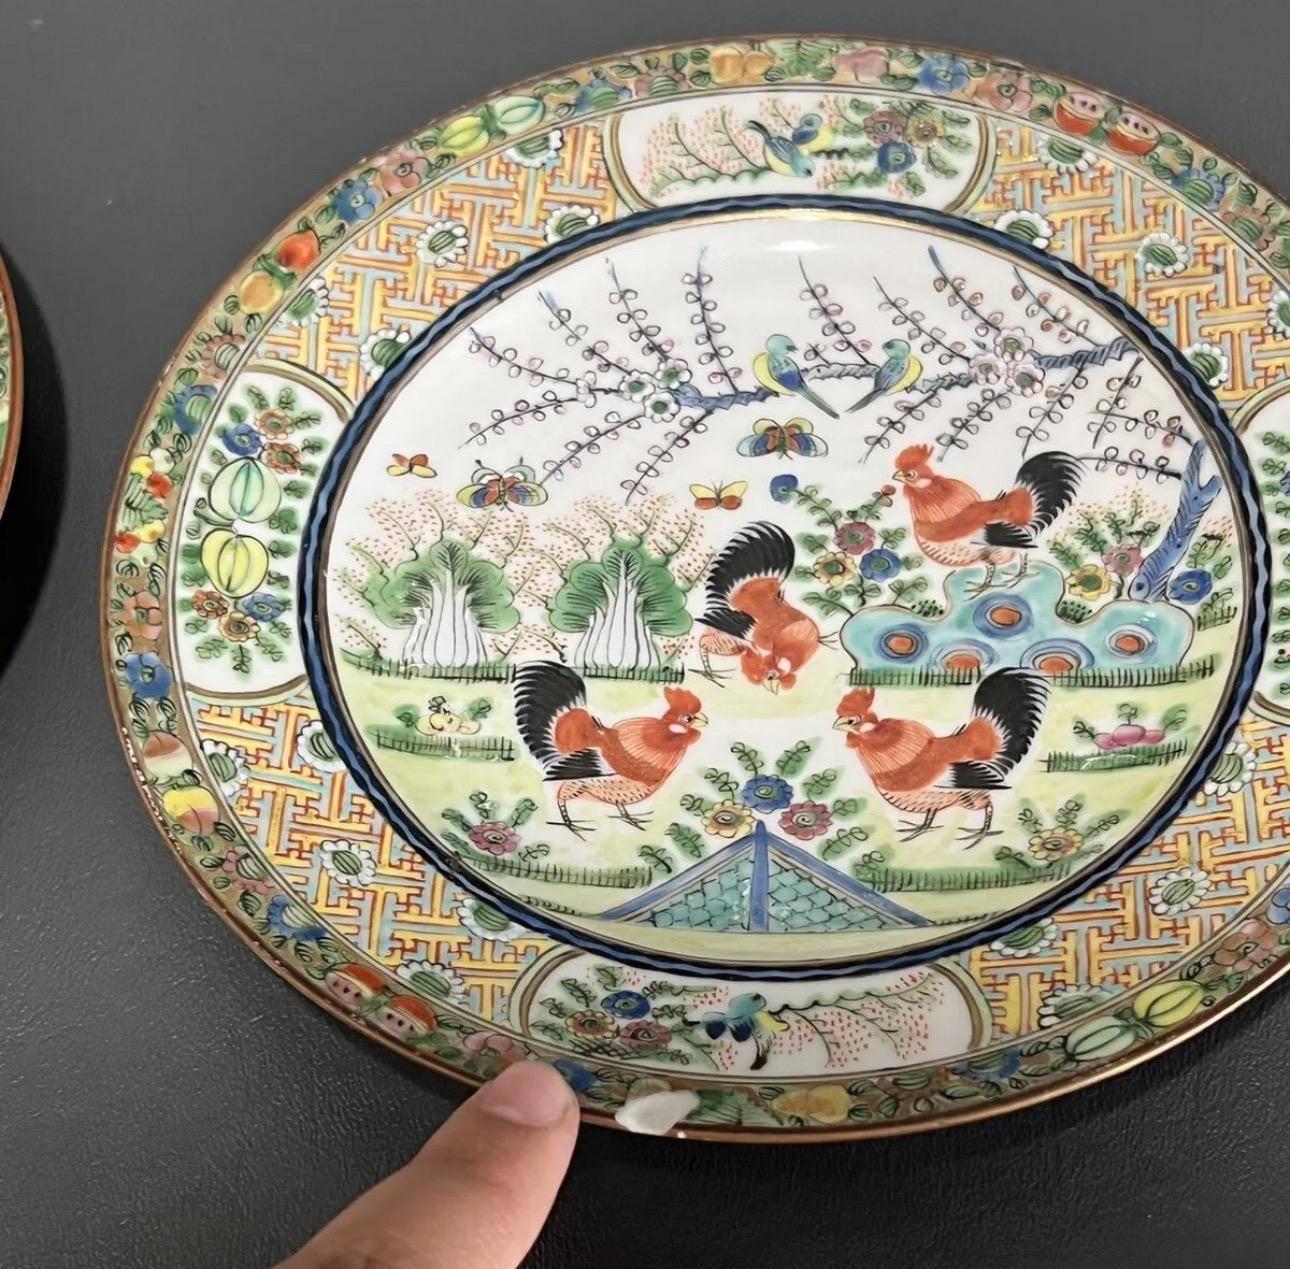 This set of 12 antique Chinese porcelain dishes depicts a lively chicken theme that is sure to add character to any collection. Each plate features a unique design and vibrant colors. The craftsmanship of these dishes is exceptional, with intricate